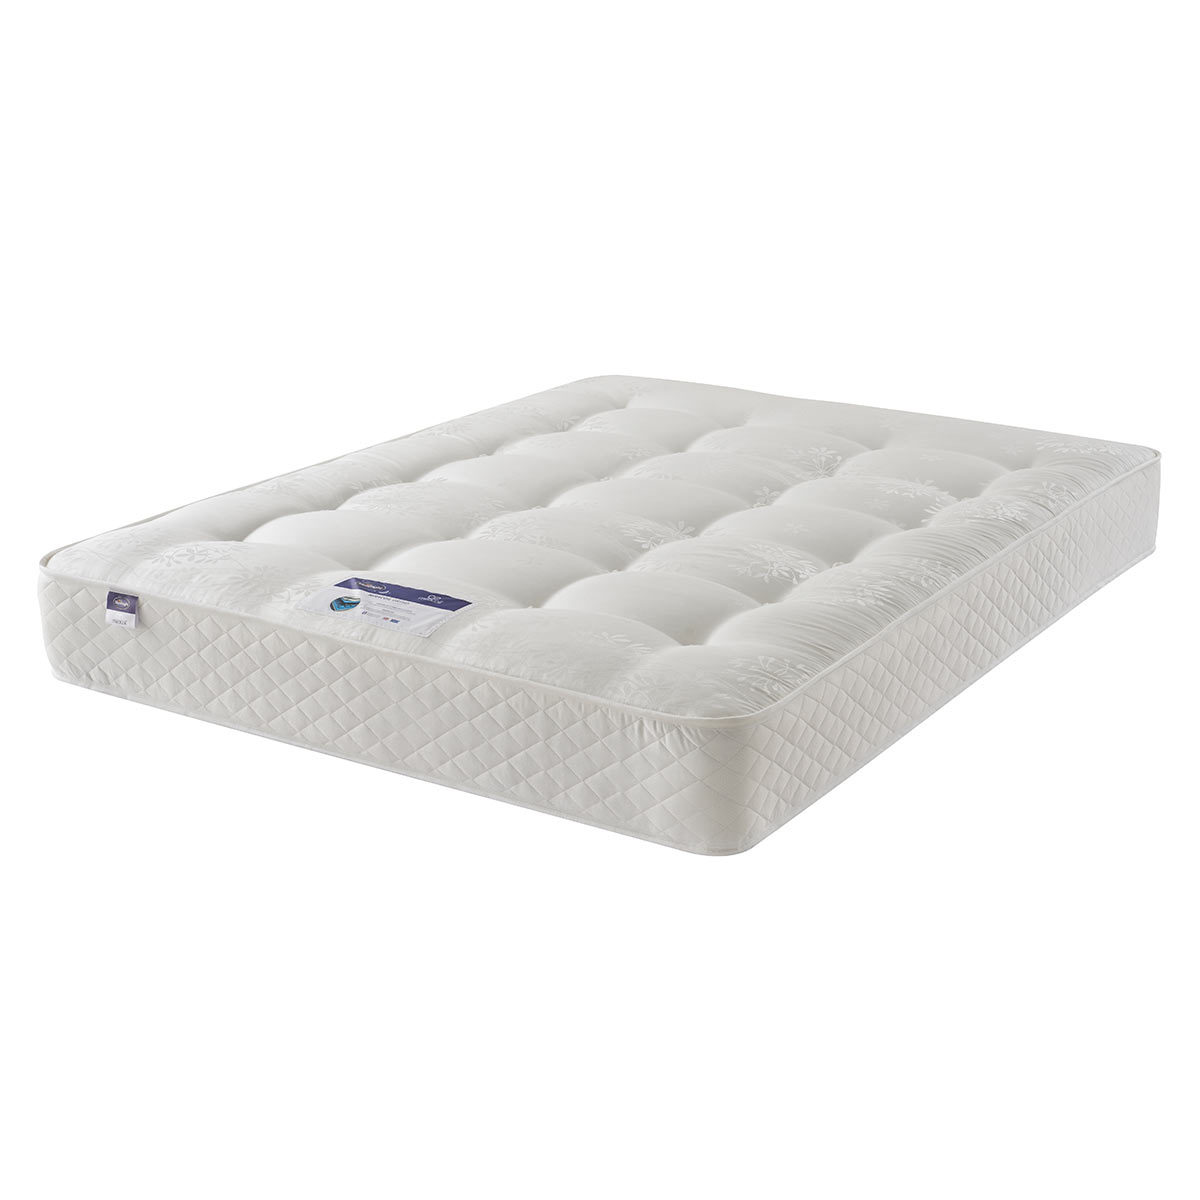 Silentnight Bexley Eco Miracoil Ortho Super King Size